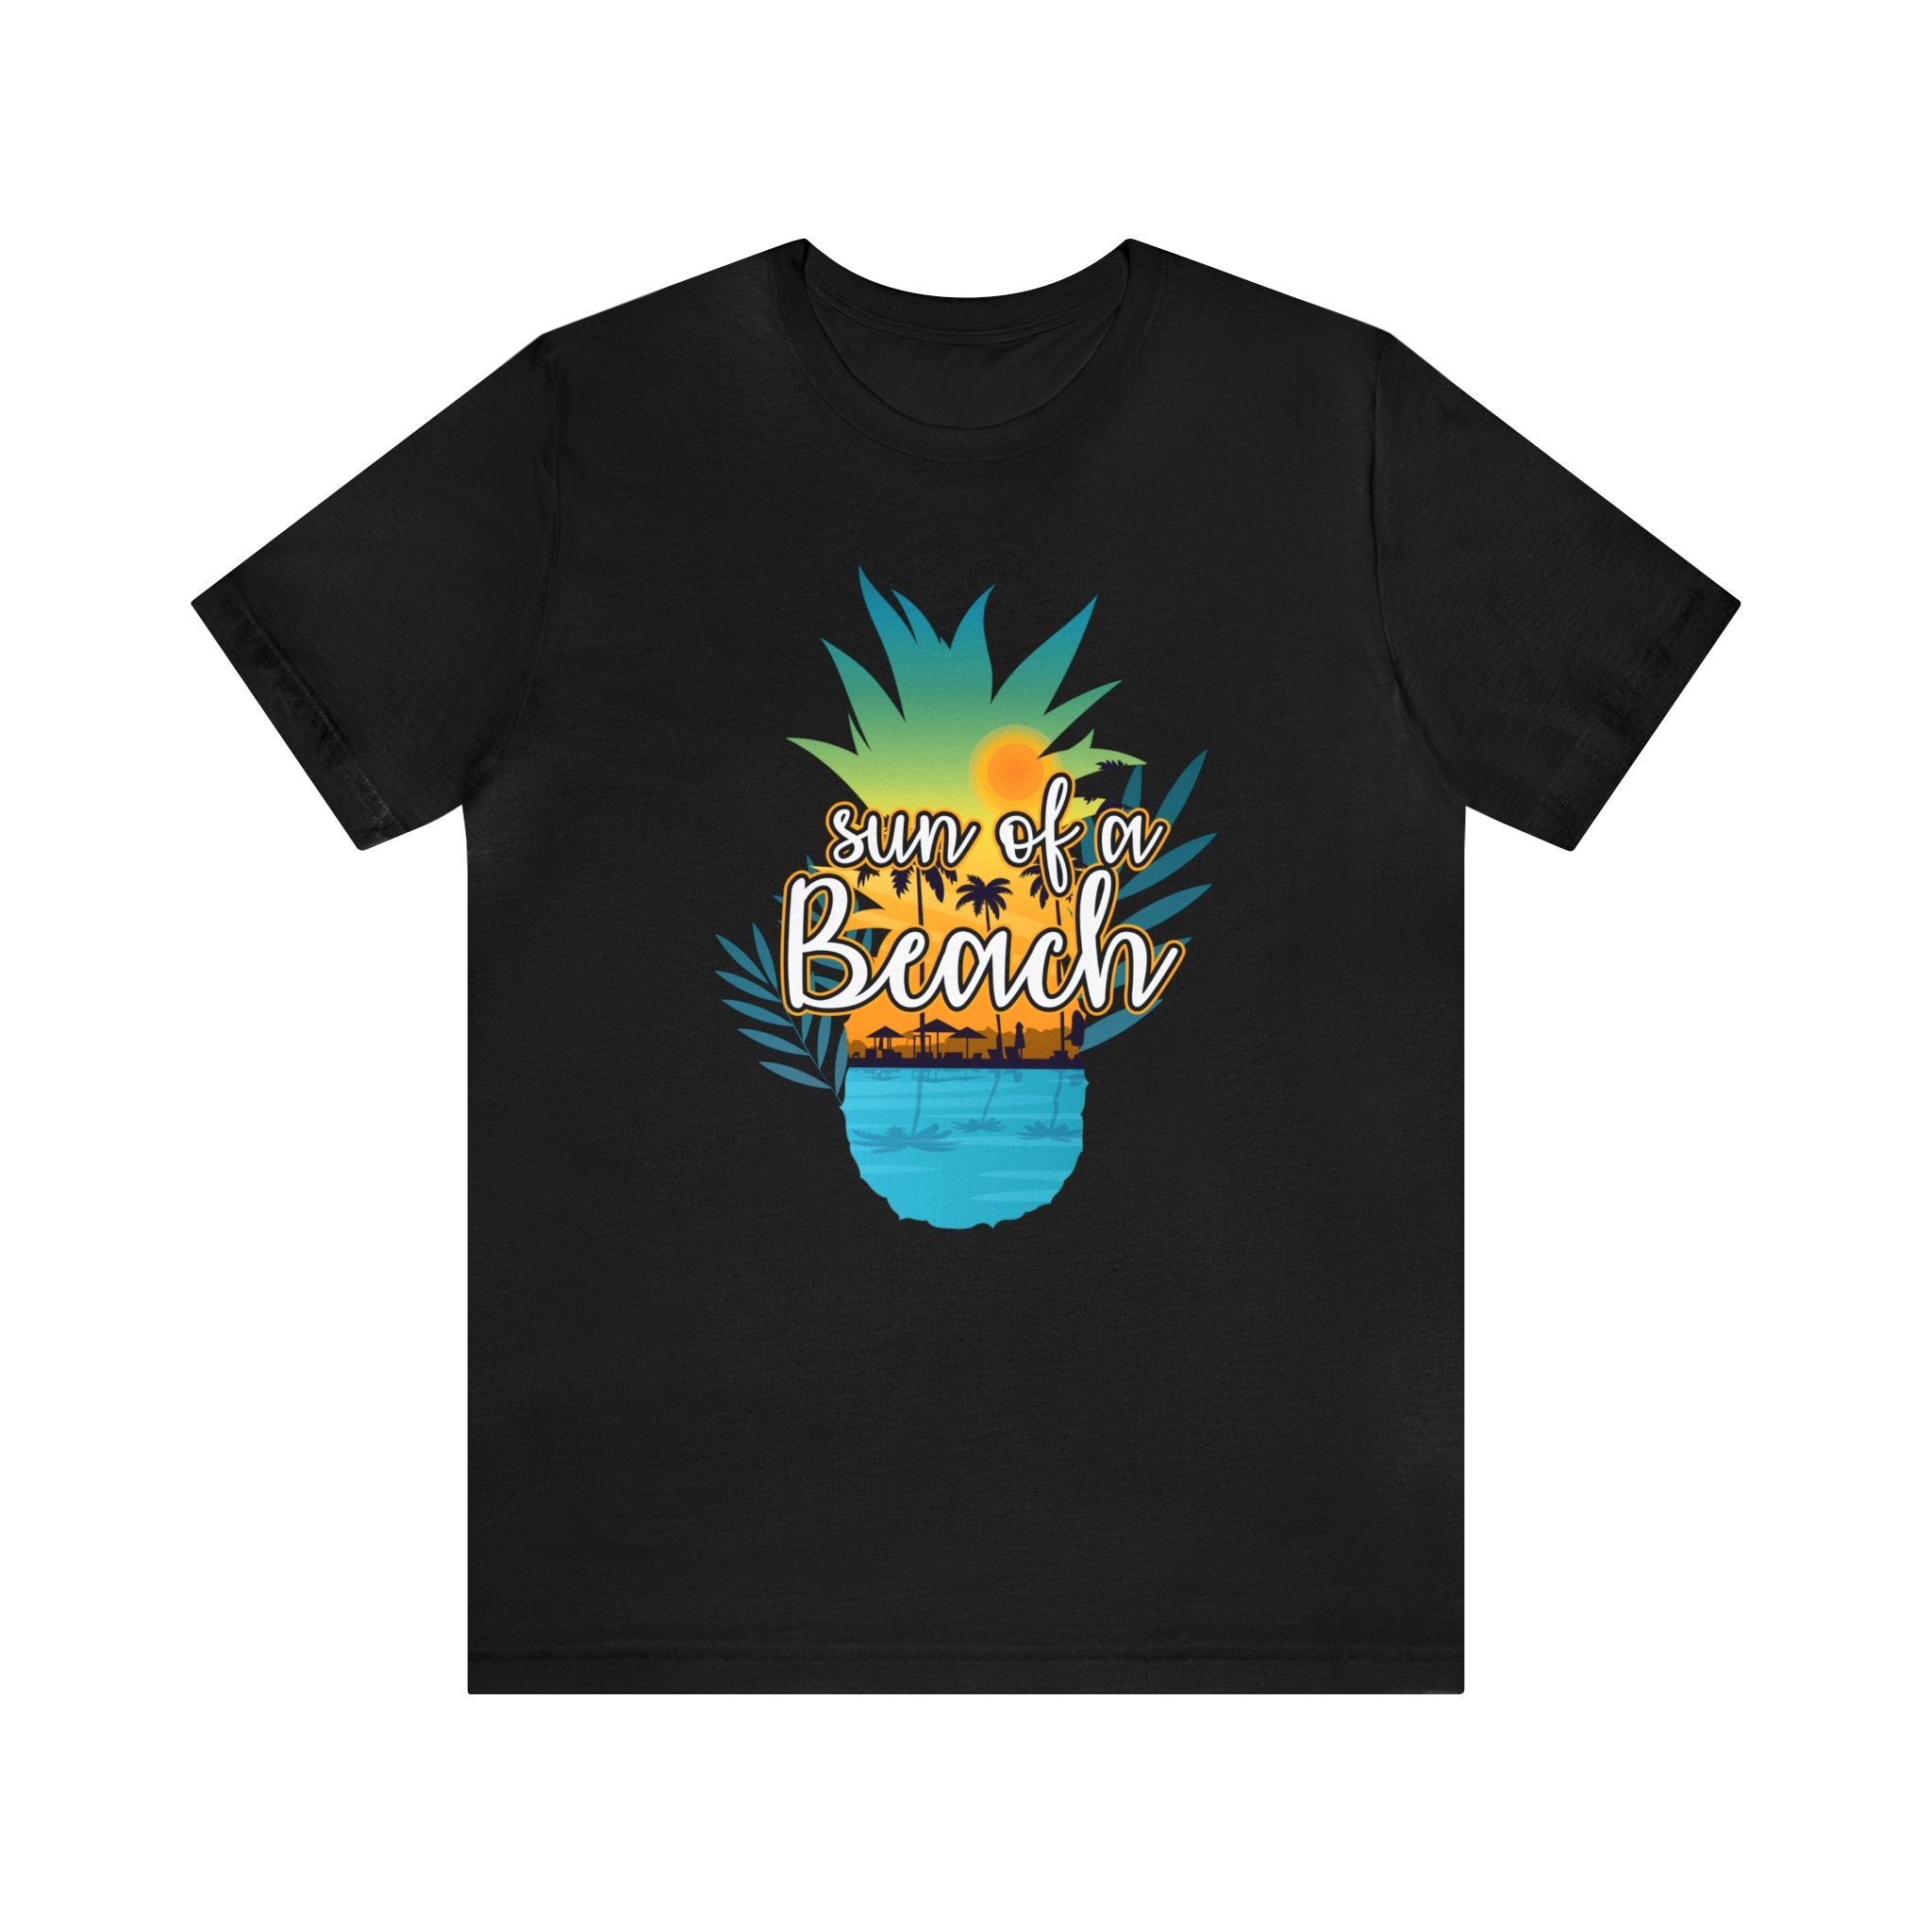 A Sun of a Beach T-Shirt with a pineapple on it.